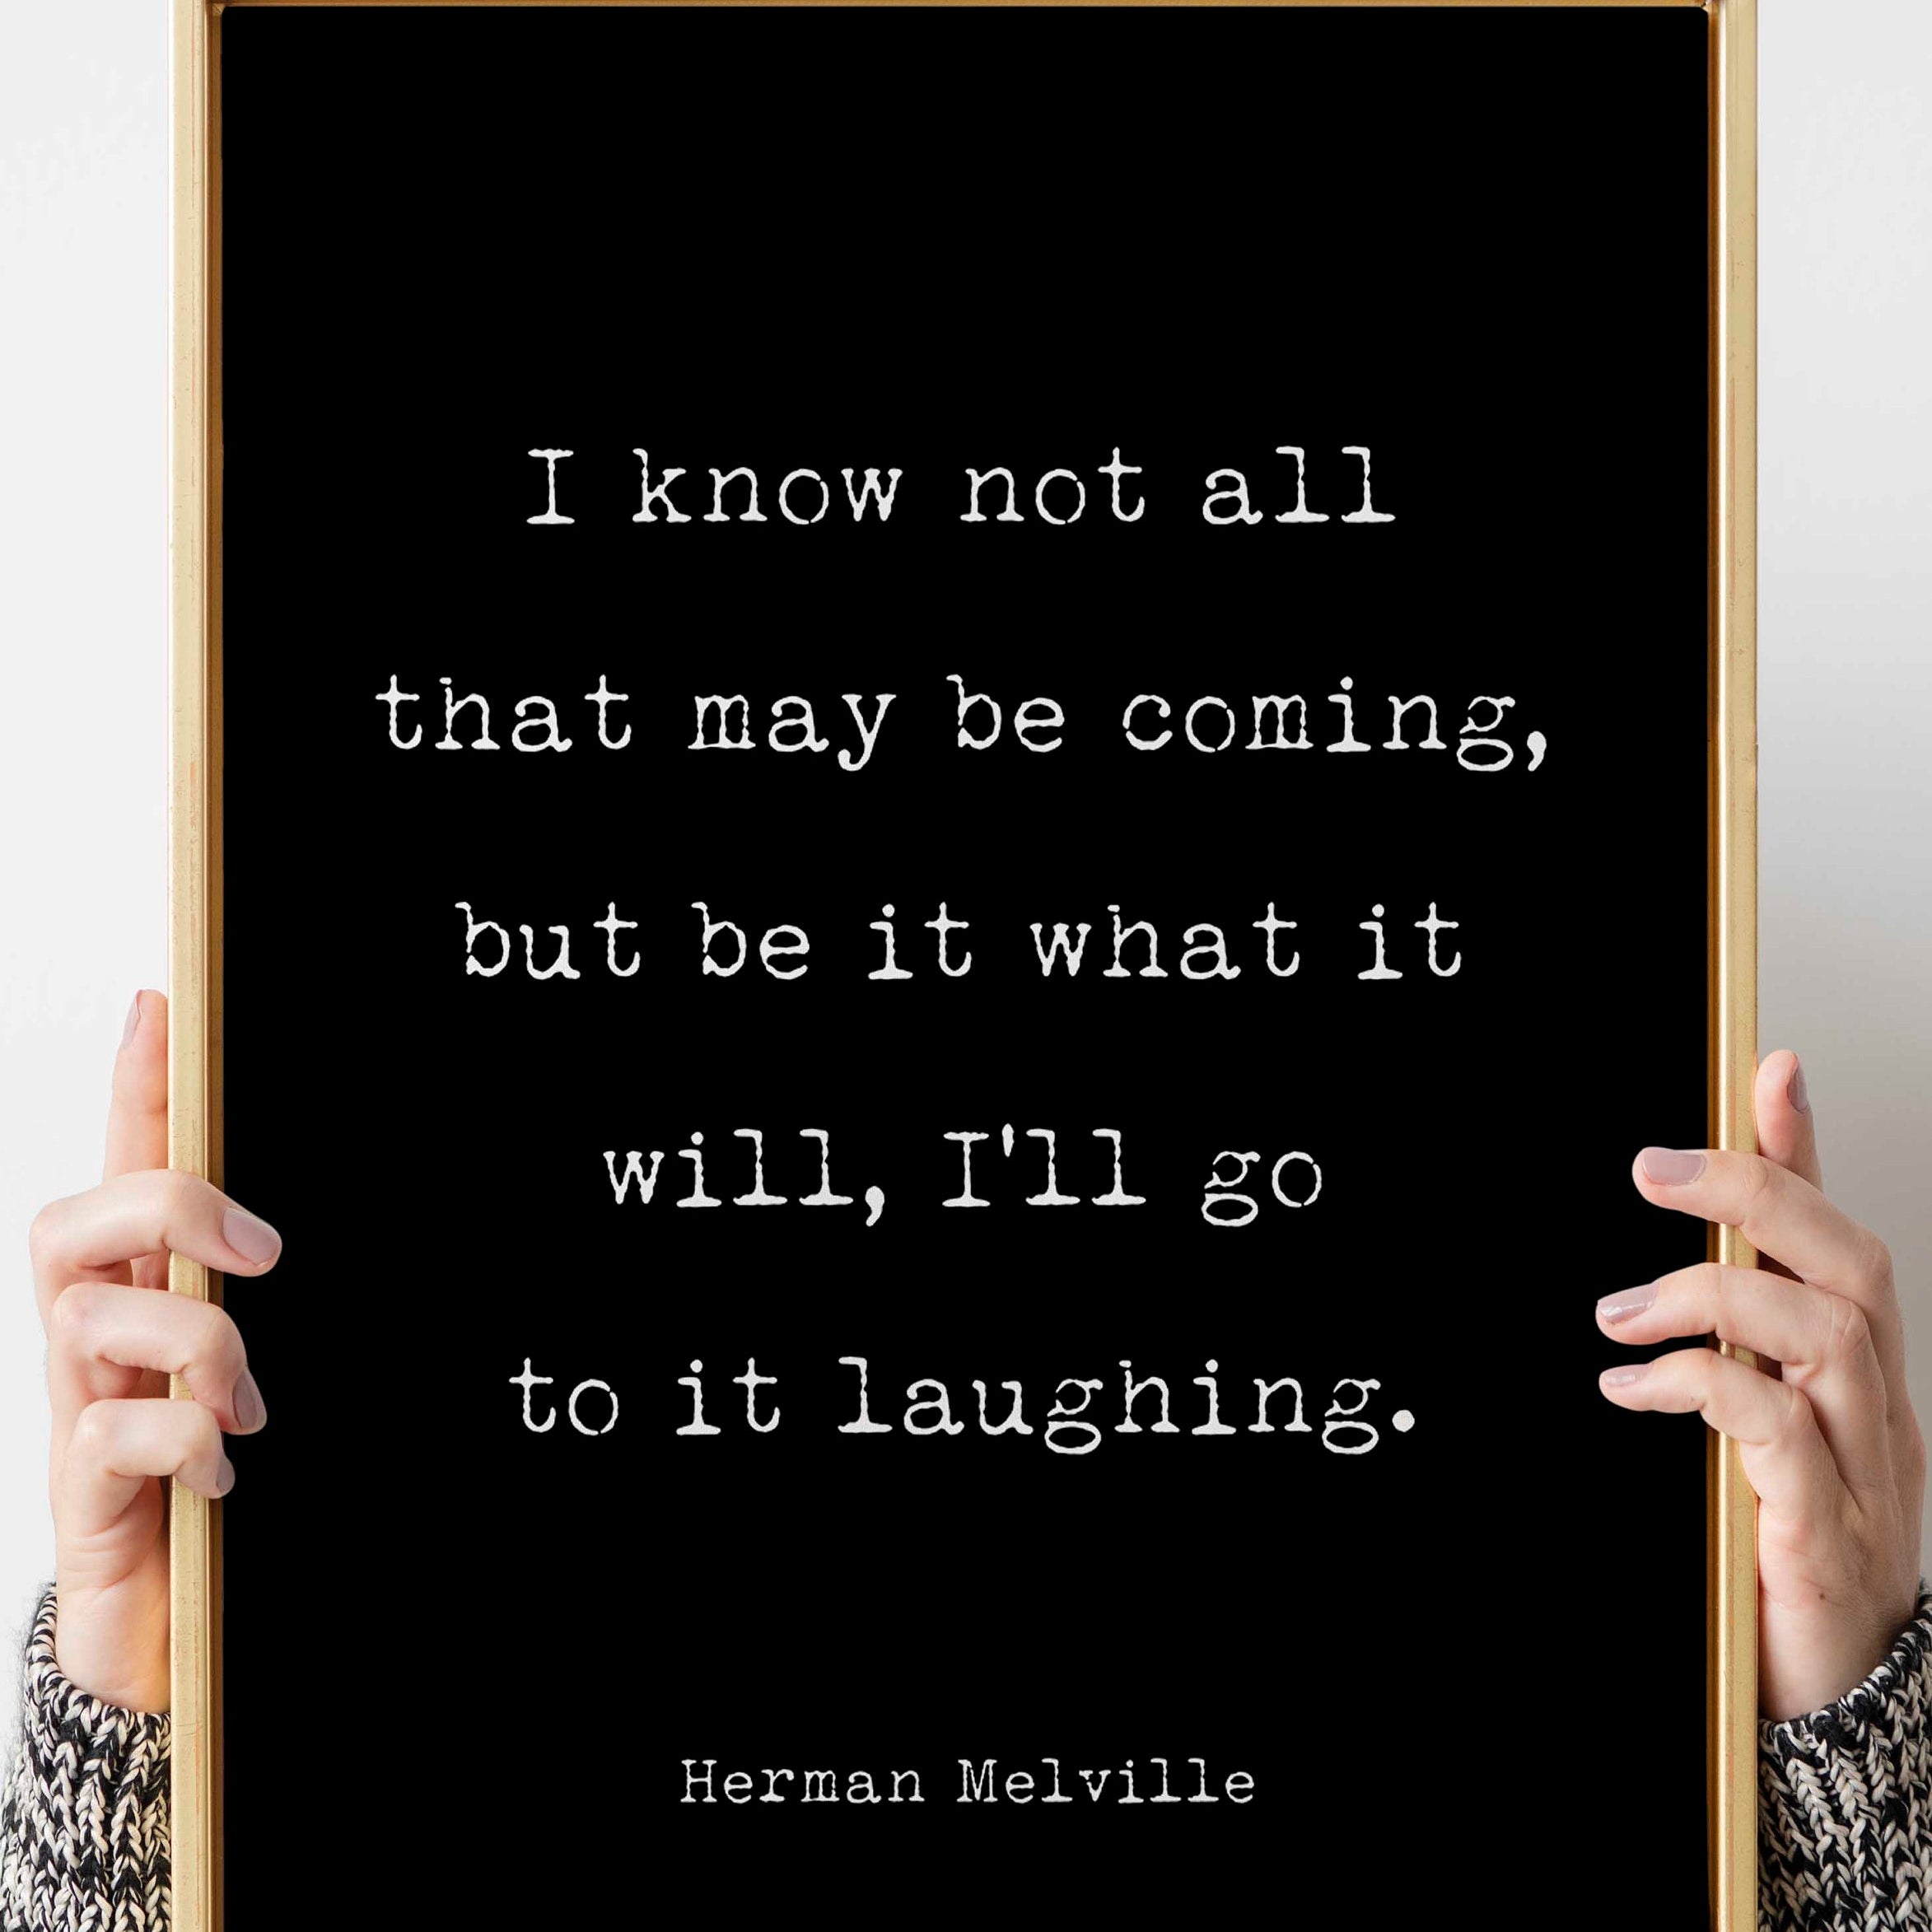 Moby Dick Herman Melville book quote print - I know not all that may be coming